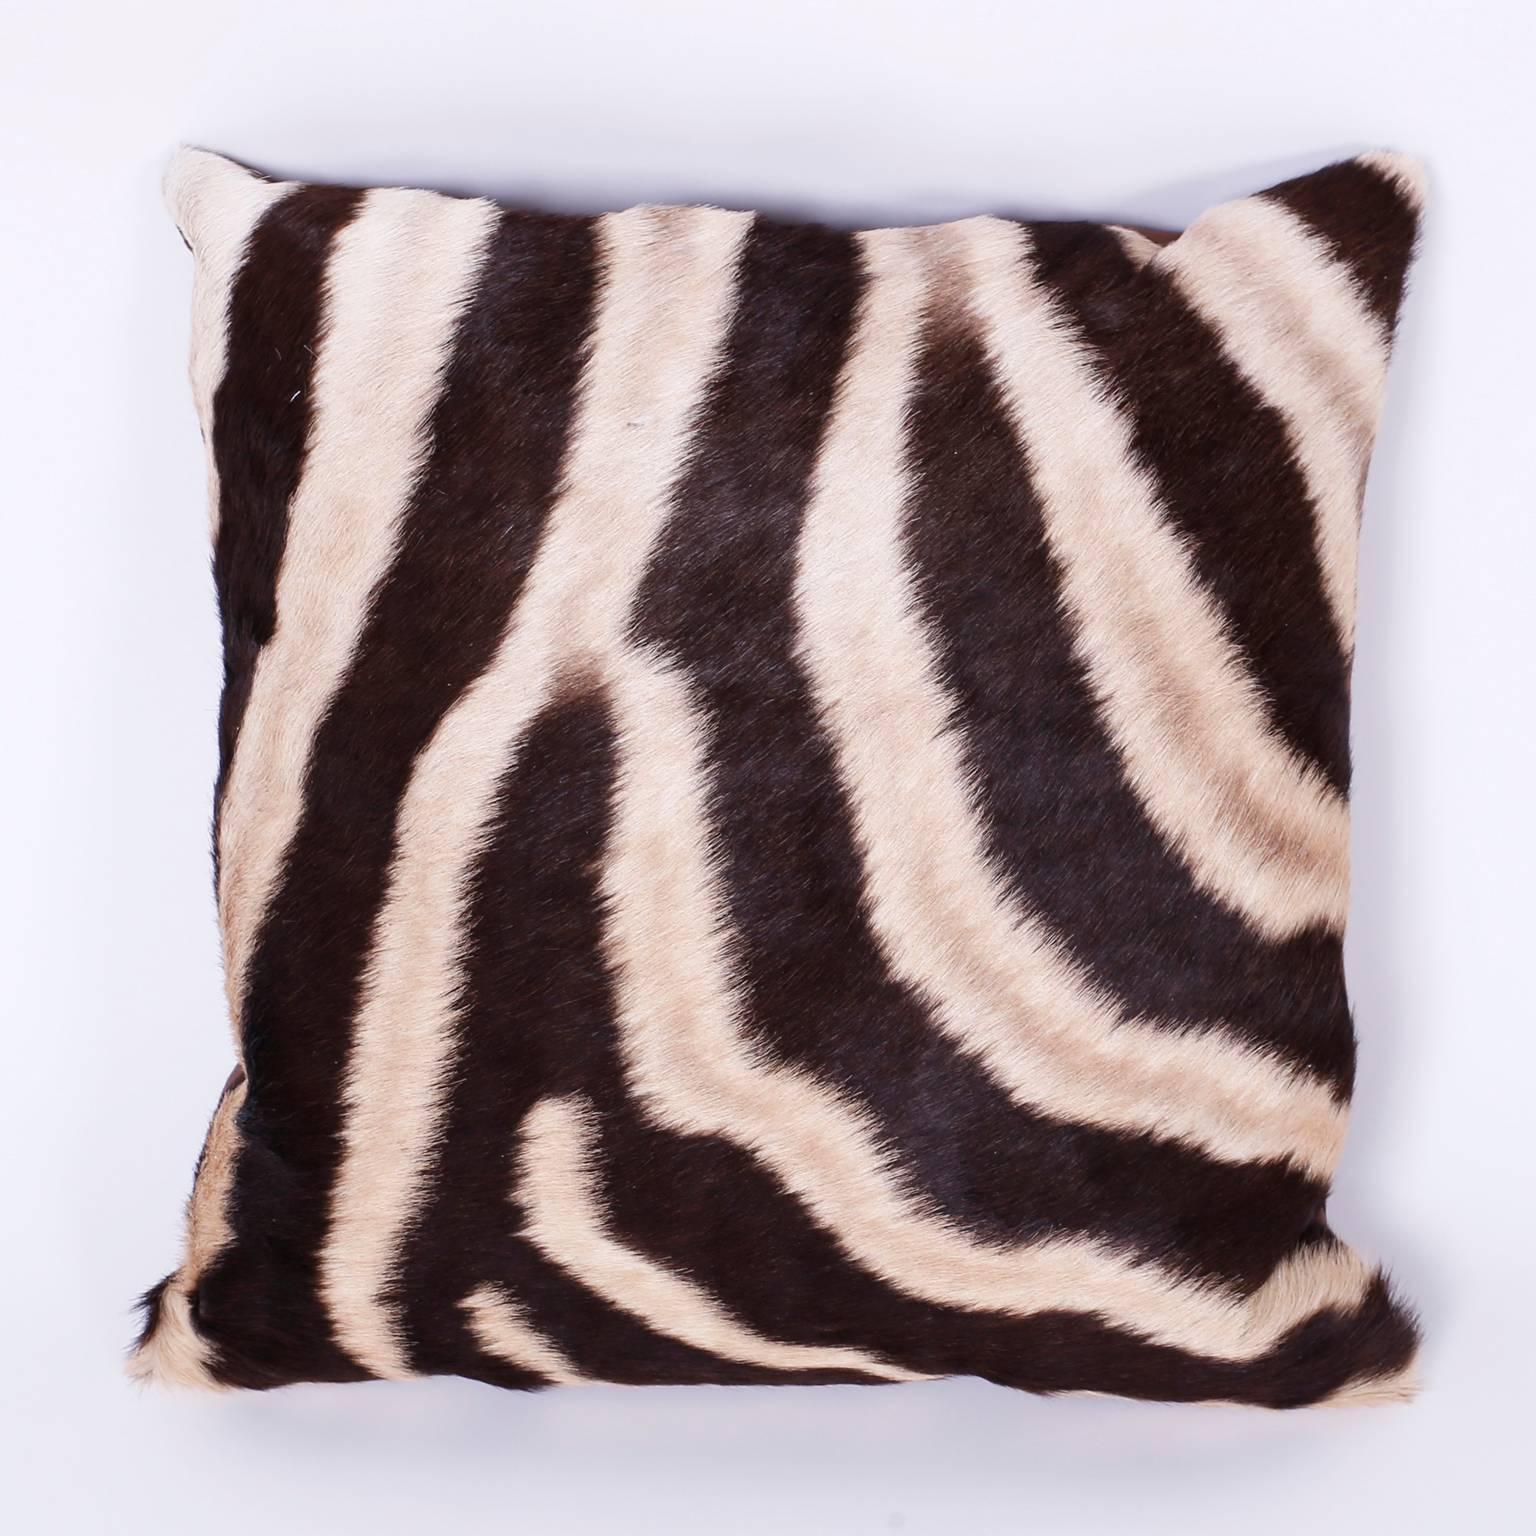 Chic pair of organic zebra hide pillows displaying nature's iconic camouflage. The backs are cotton with zippers for easy care.
  